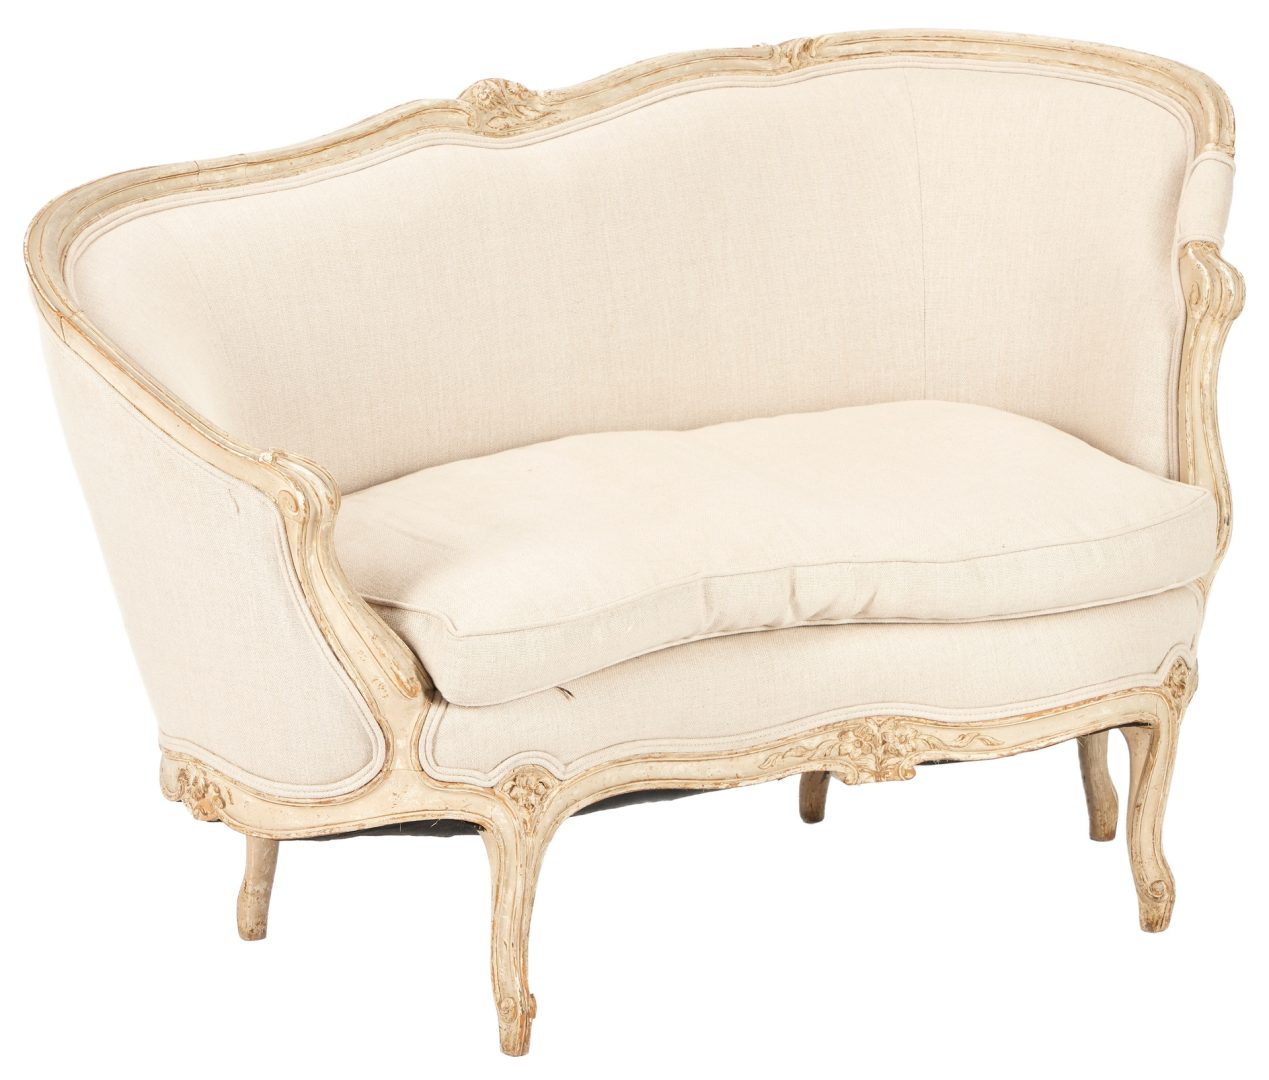 Lot 269: Louis XV Style Painted Veilleuse or Daybed